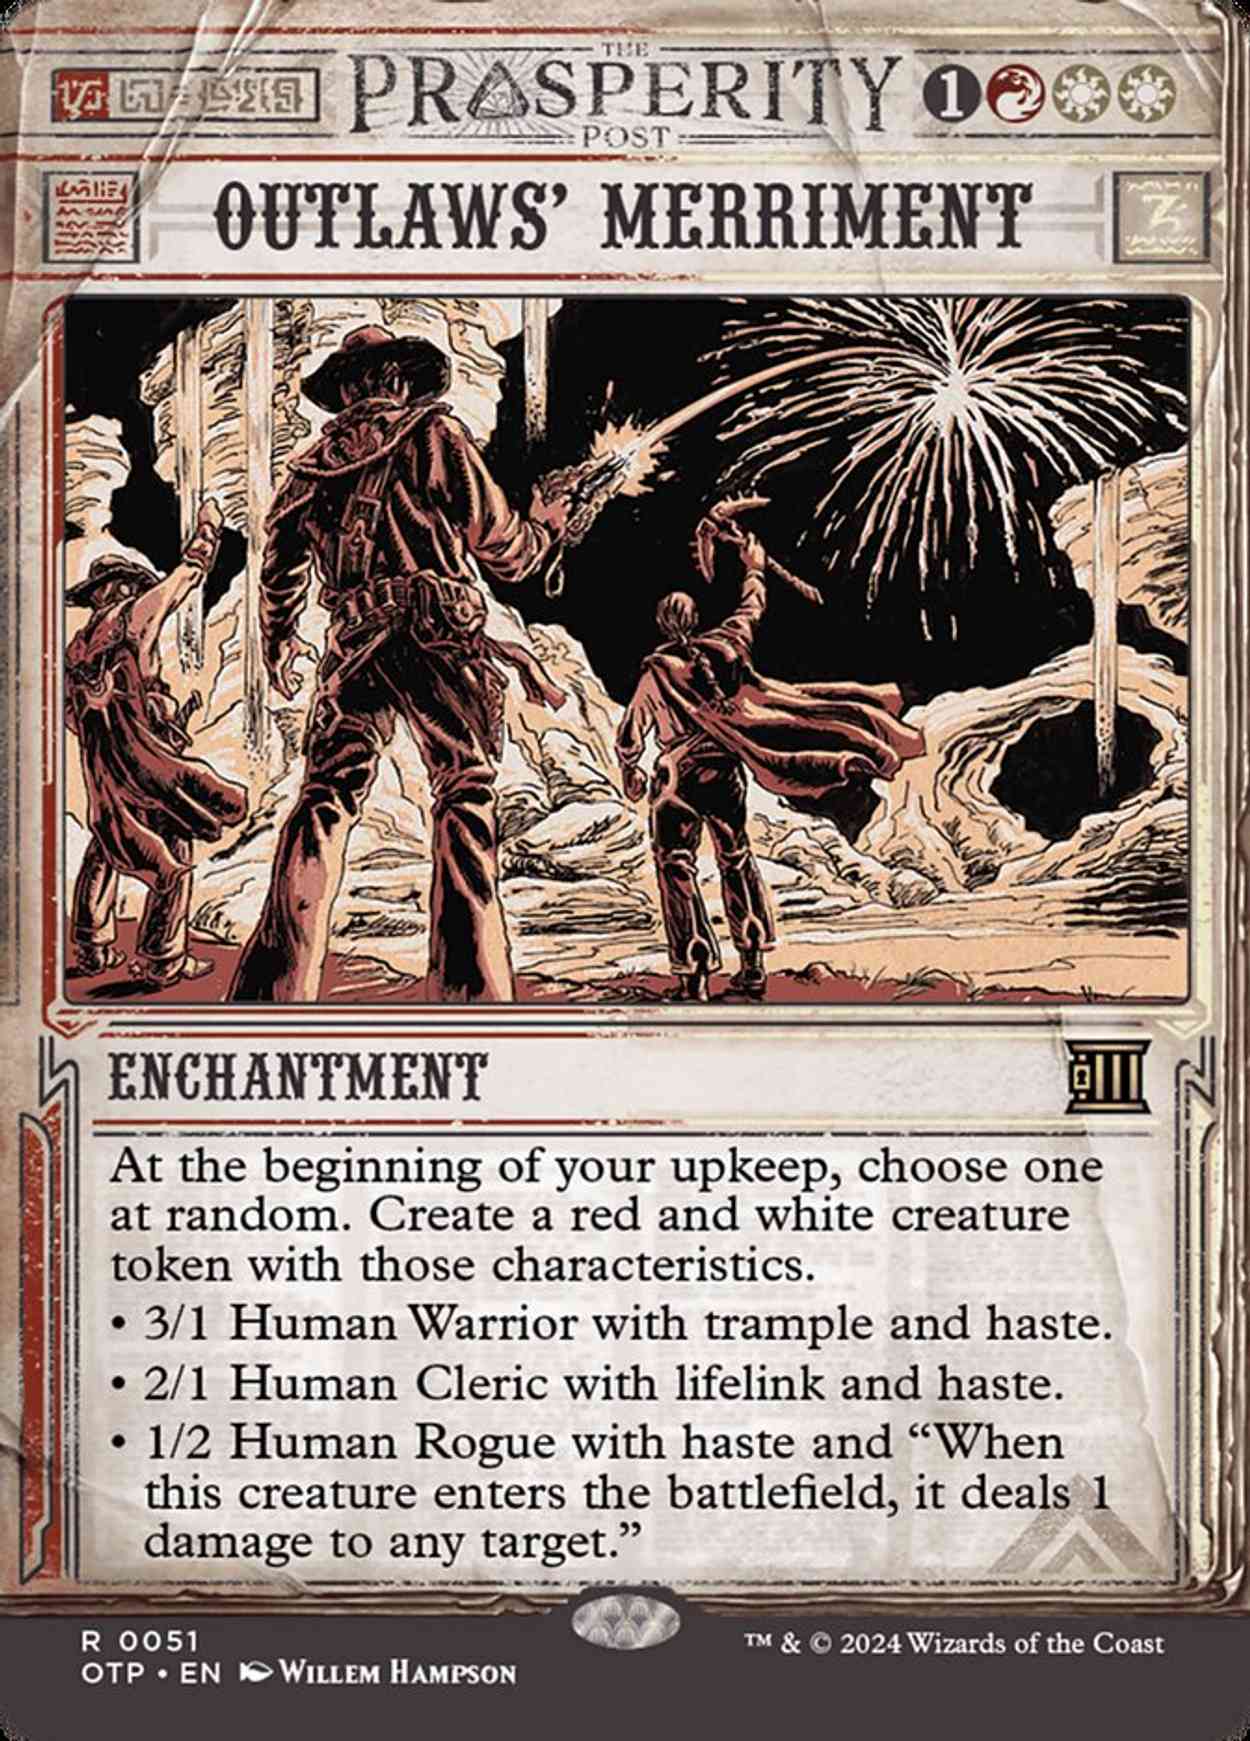 Outlaws' Merriment magic card front